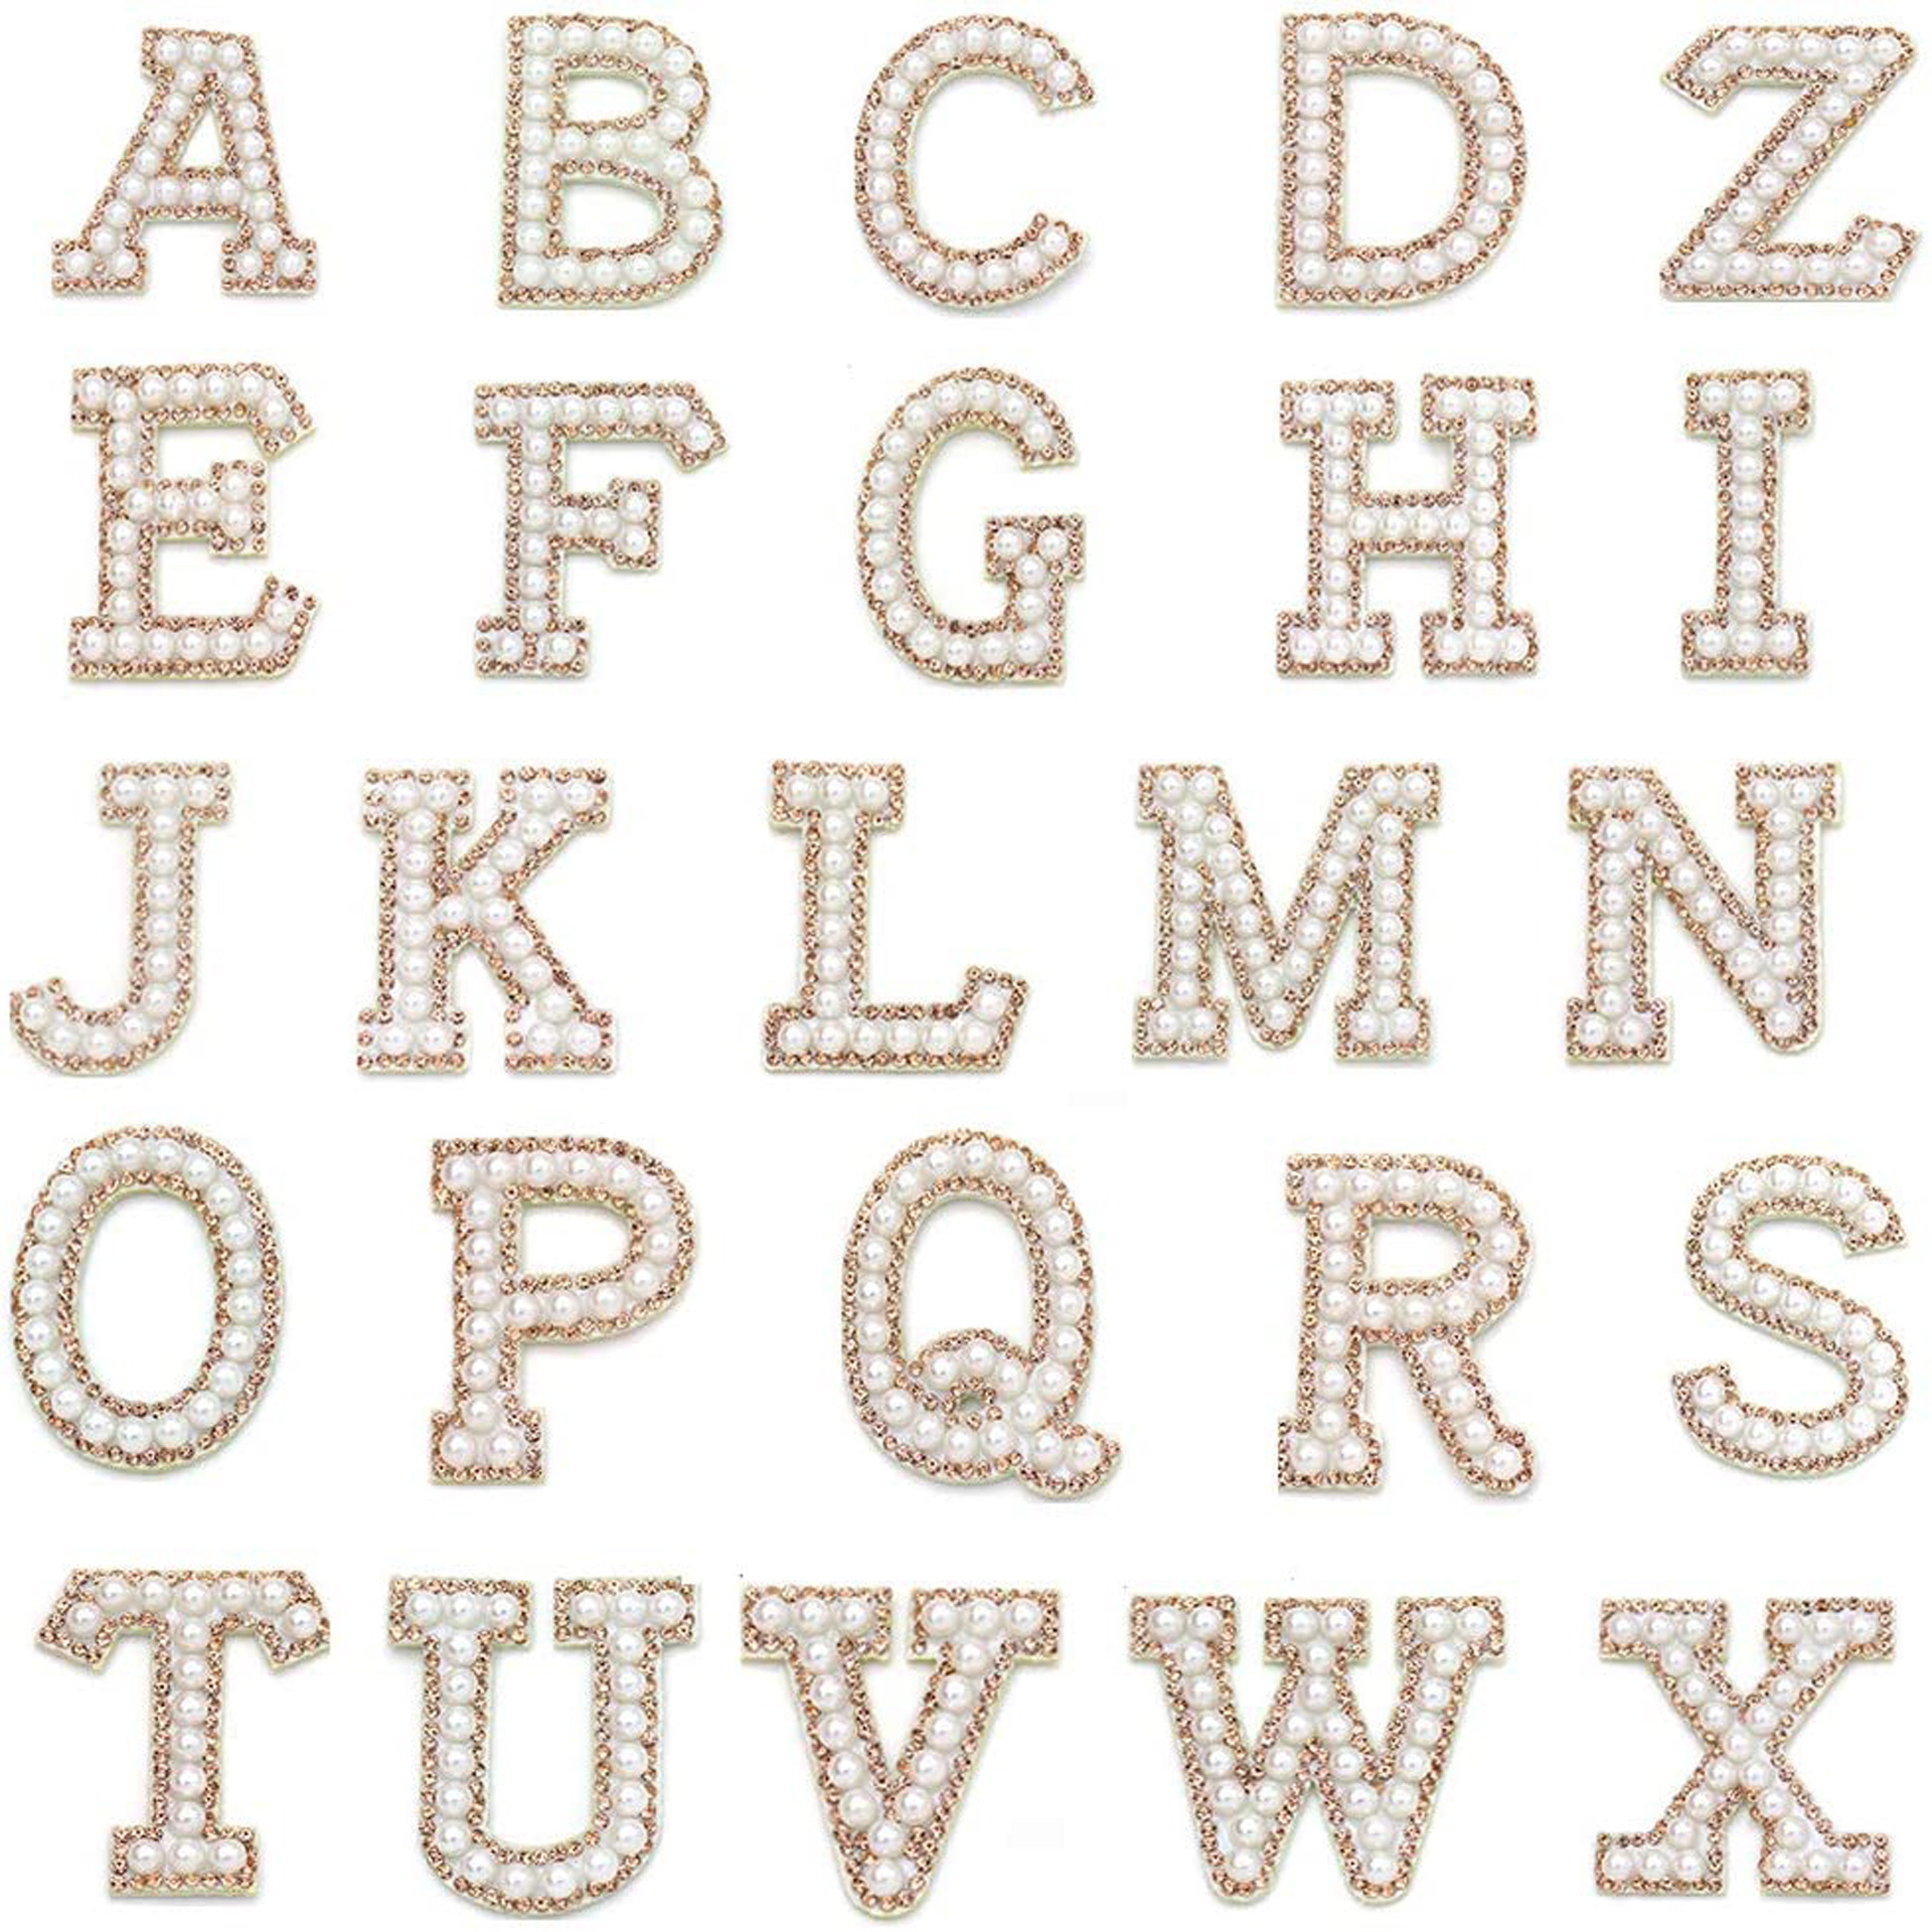 A-Z Pearl White and Gold Rhinestone English Letter Alphabet - Etsy